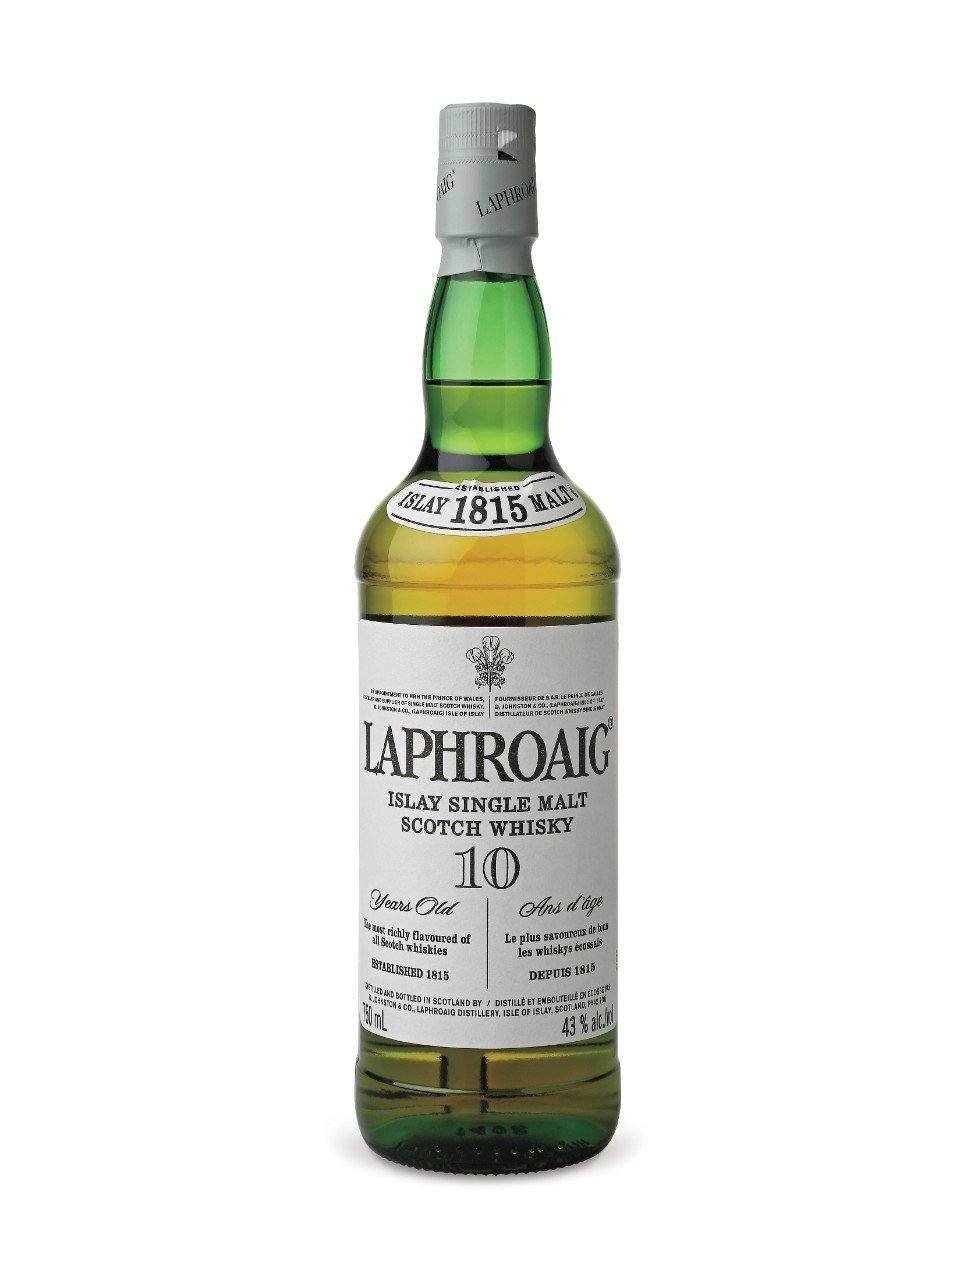 Laphroaig 10 Year Old Islay Single Malt Scotch Whisky | Exquisite Wine & Alcohol Gift Delivery Toronto Canada | Vyno